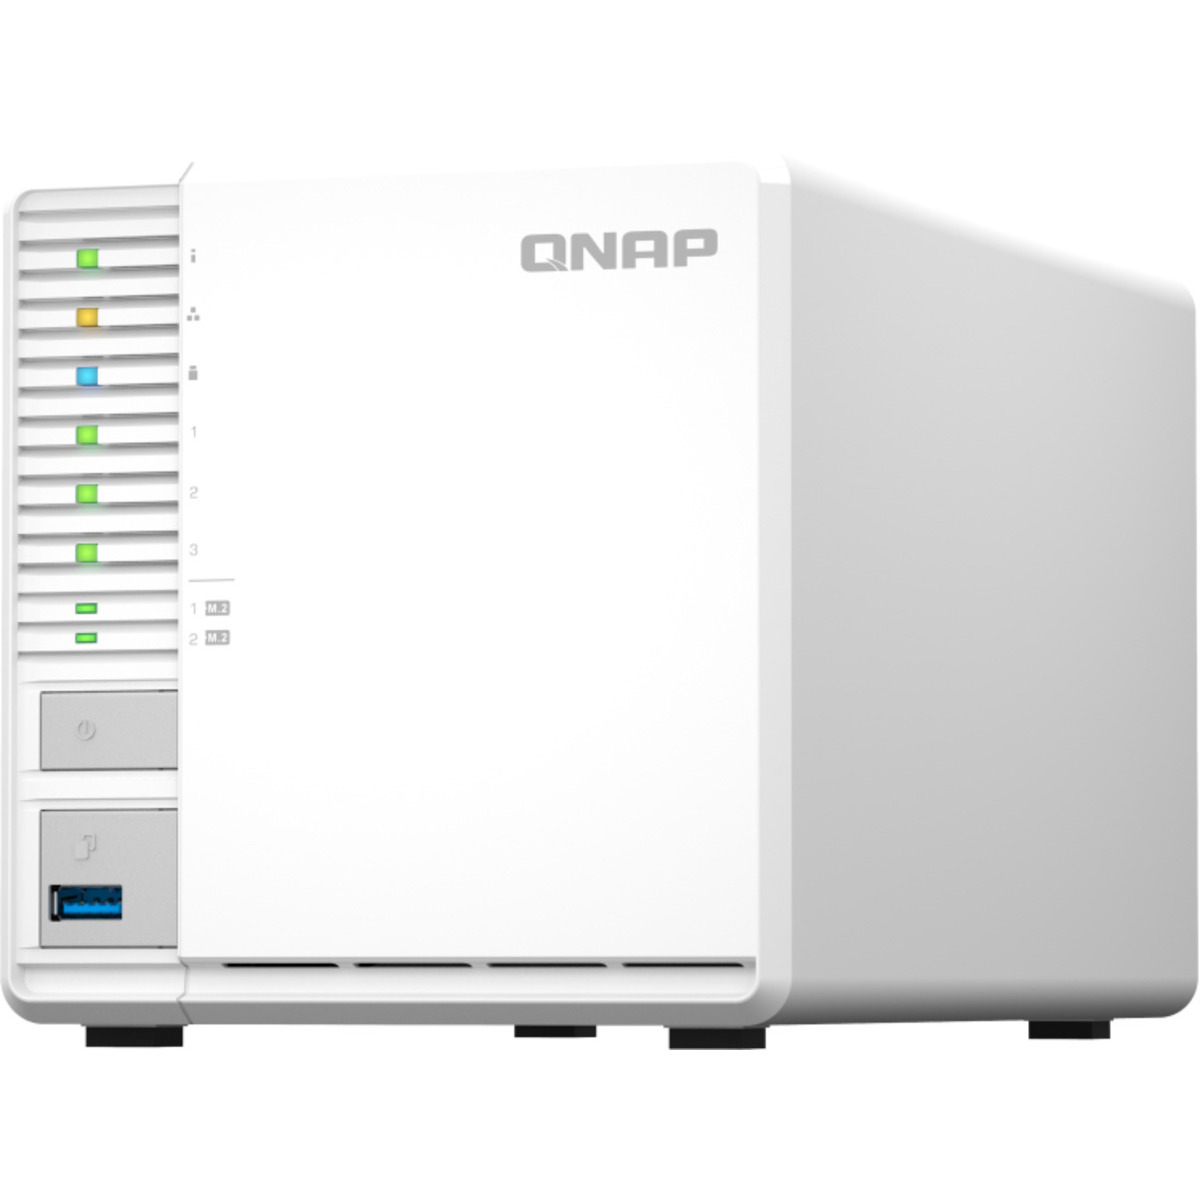 buy $2039 QNAP TS-364 24tb Desktop NAS - Network Attached Storage Device 3x8000gb Samsung 870 QVO MZ-77Q8T0 2.5 560/530MB/s SATA 6Gb/s SSD CONSUMER Class Drives Installed - Burn-In Tested - ON SALE - nas headquarters buy network attached storage server device das new raid-5 free shipping simply usa TS-364